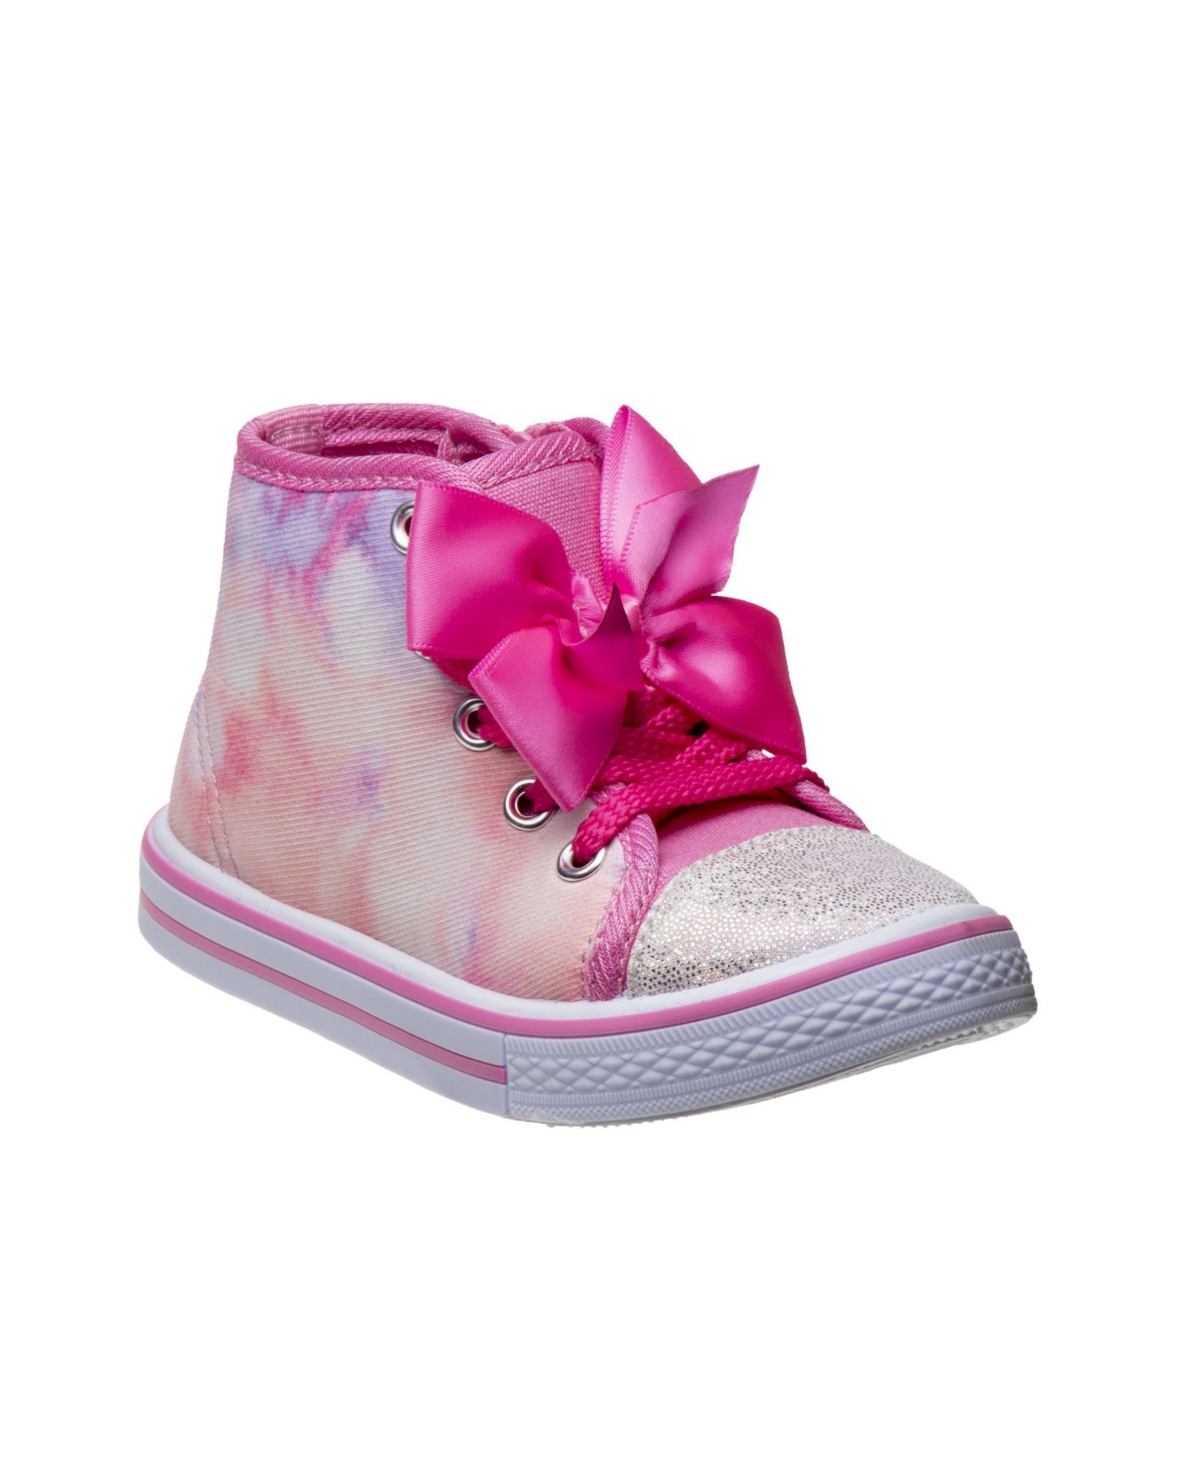 Laura Ashley Babies' Toddler Girls Signature Bow High Top Sneakers In Pink